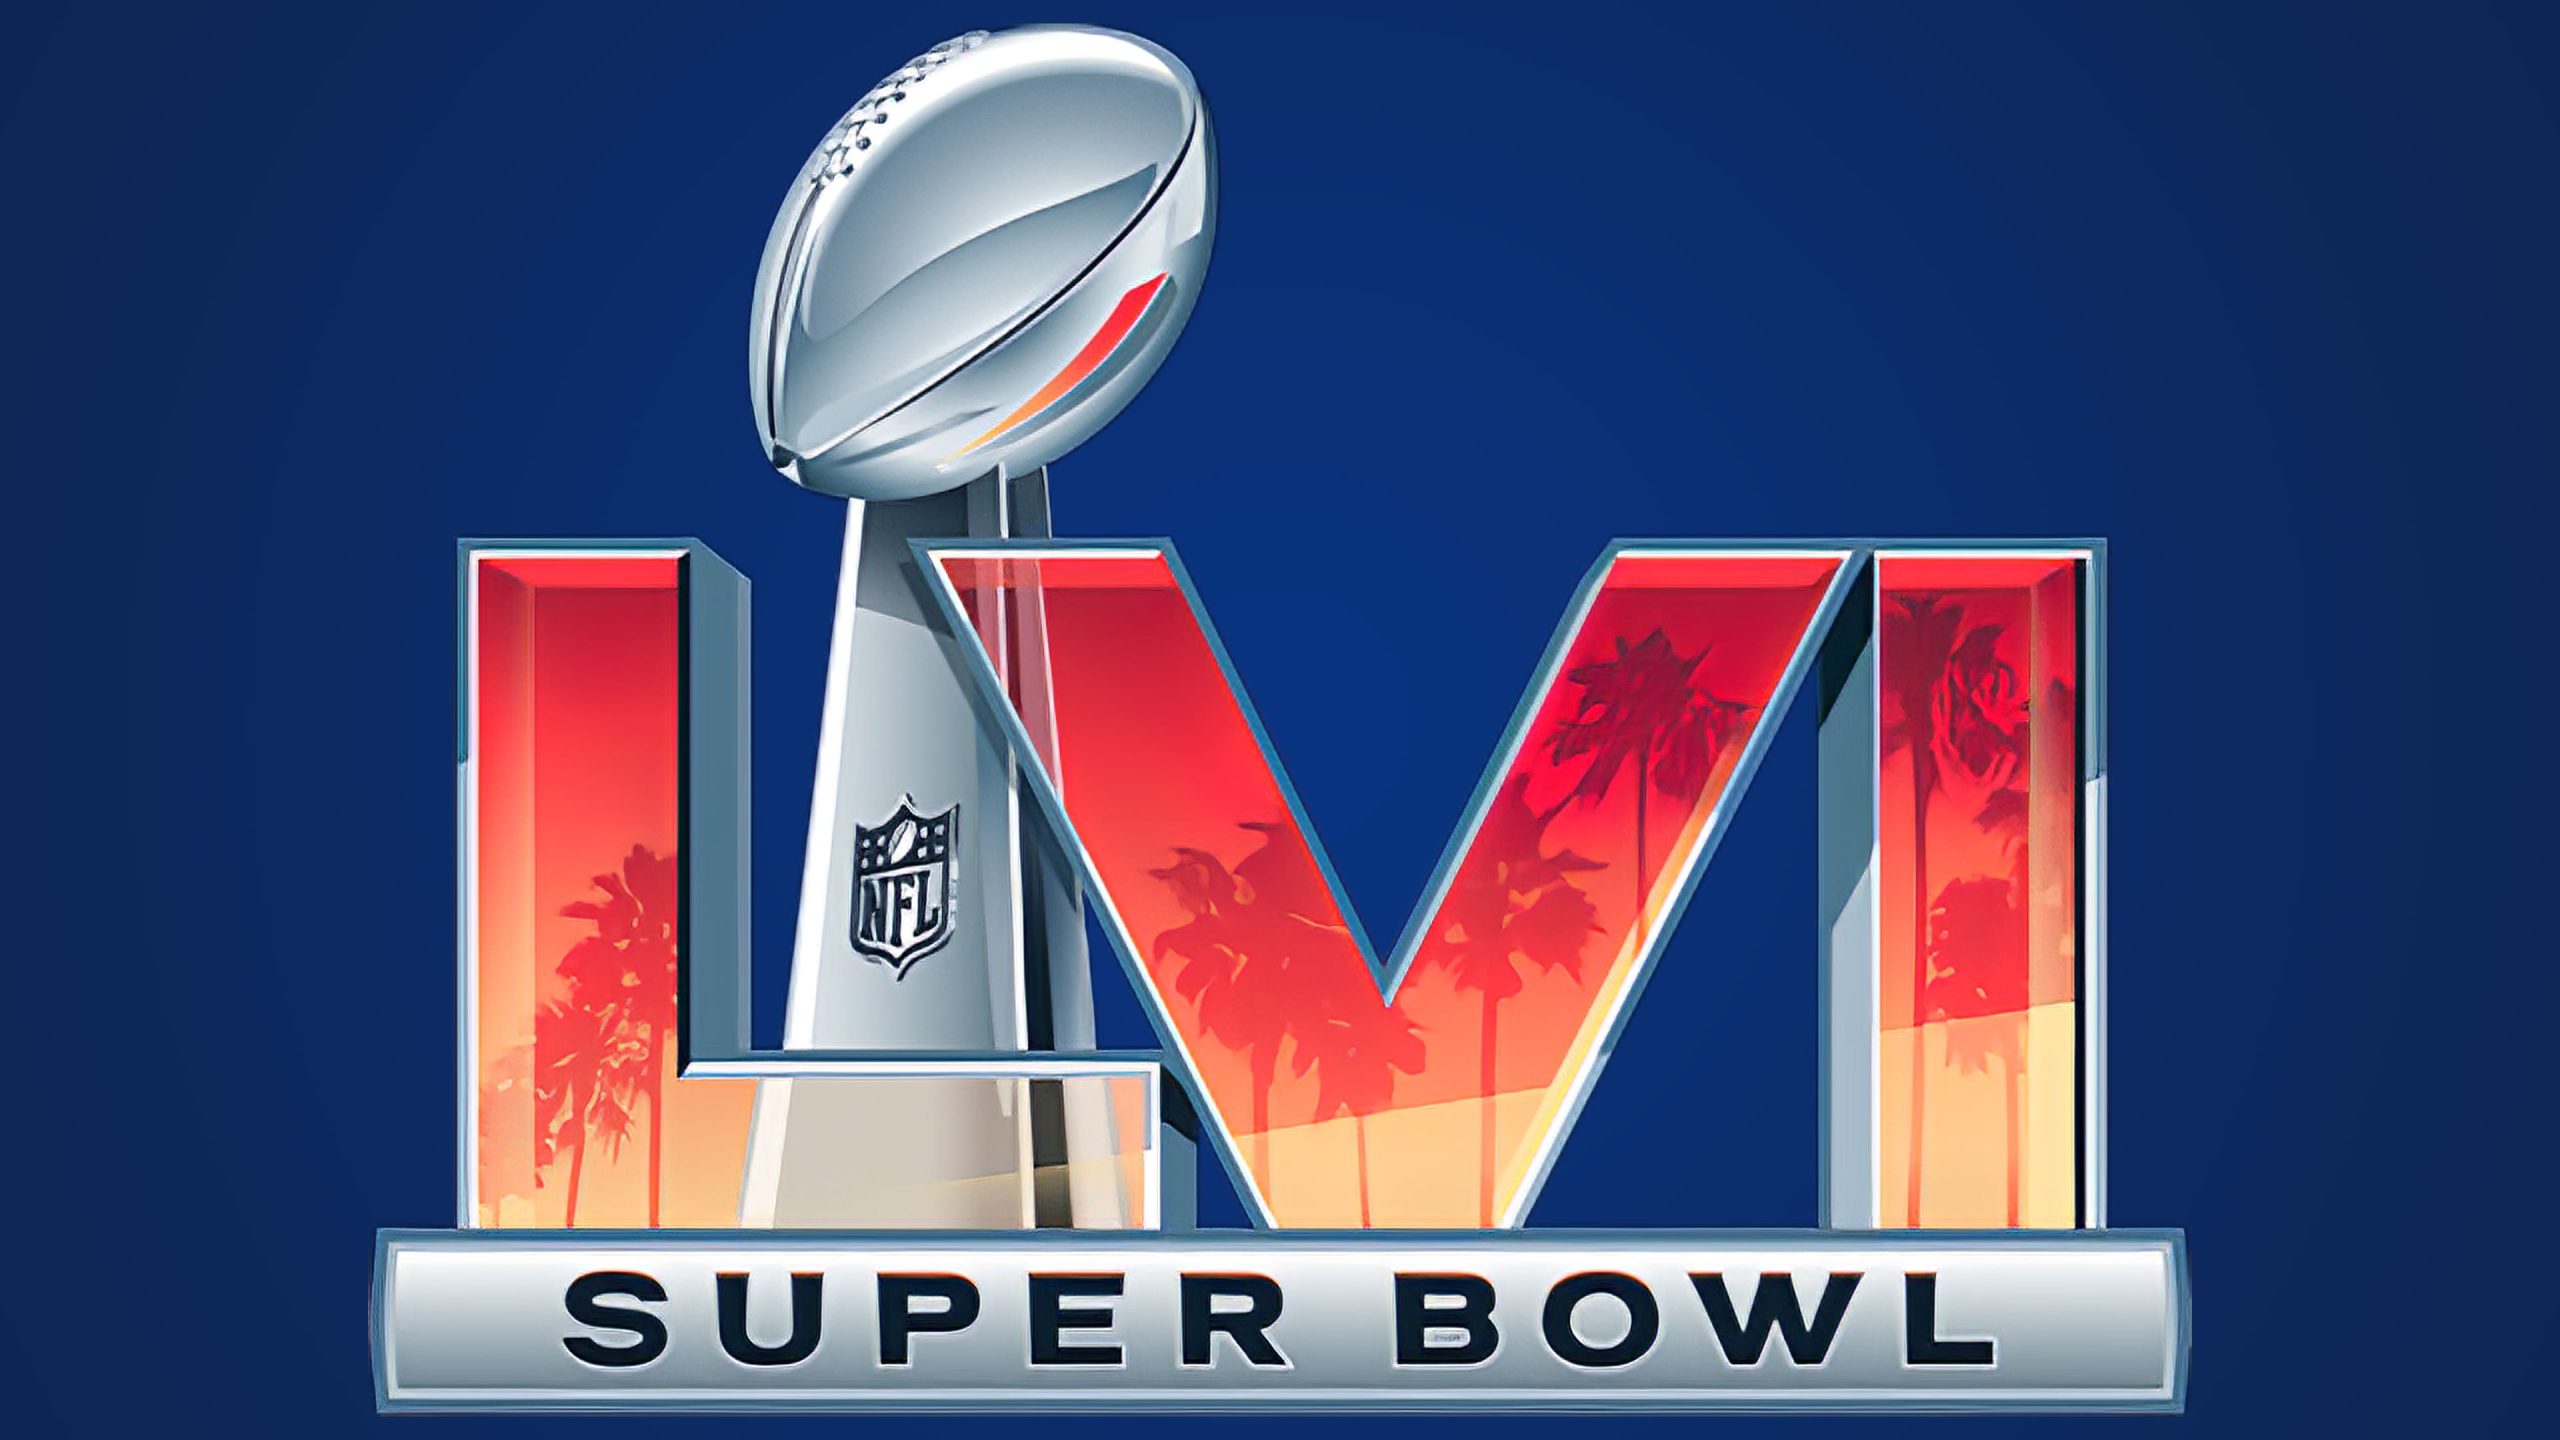 Superbowl 56 Logo Unveiled People Are Comparing It To The Promo For